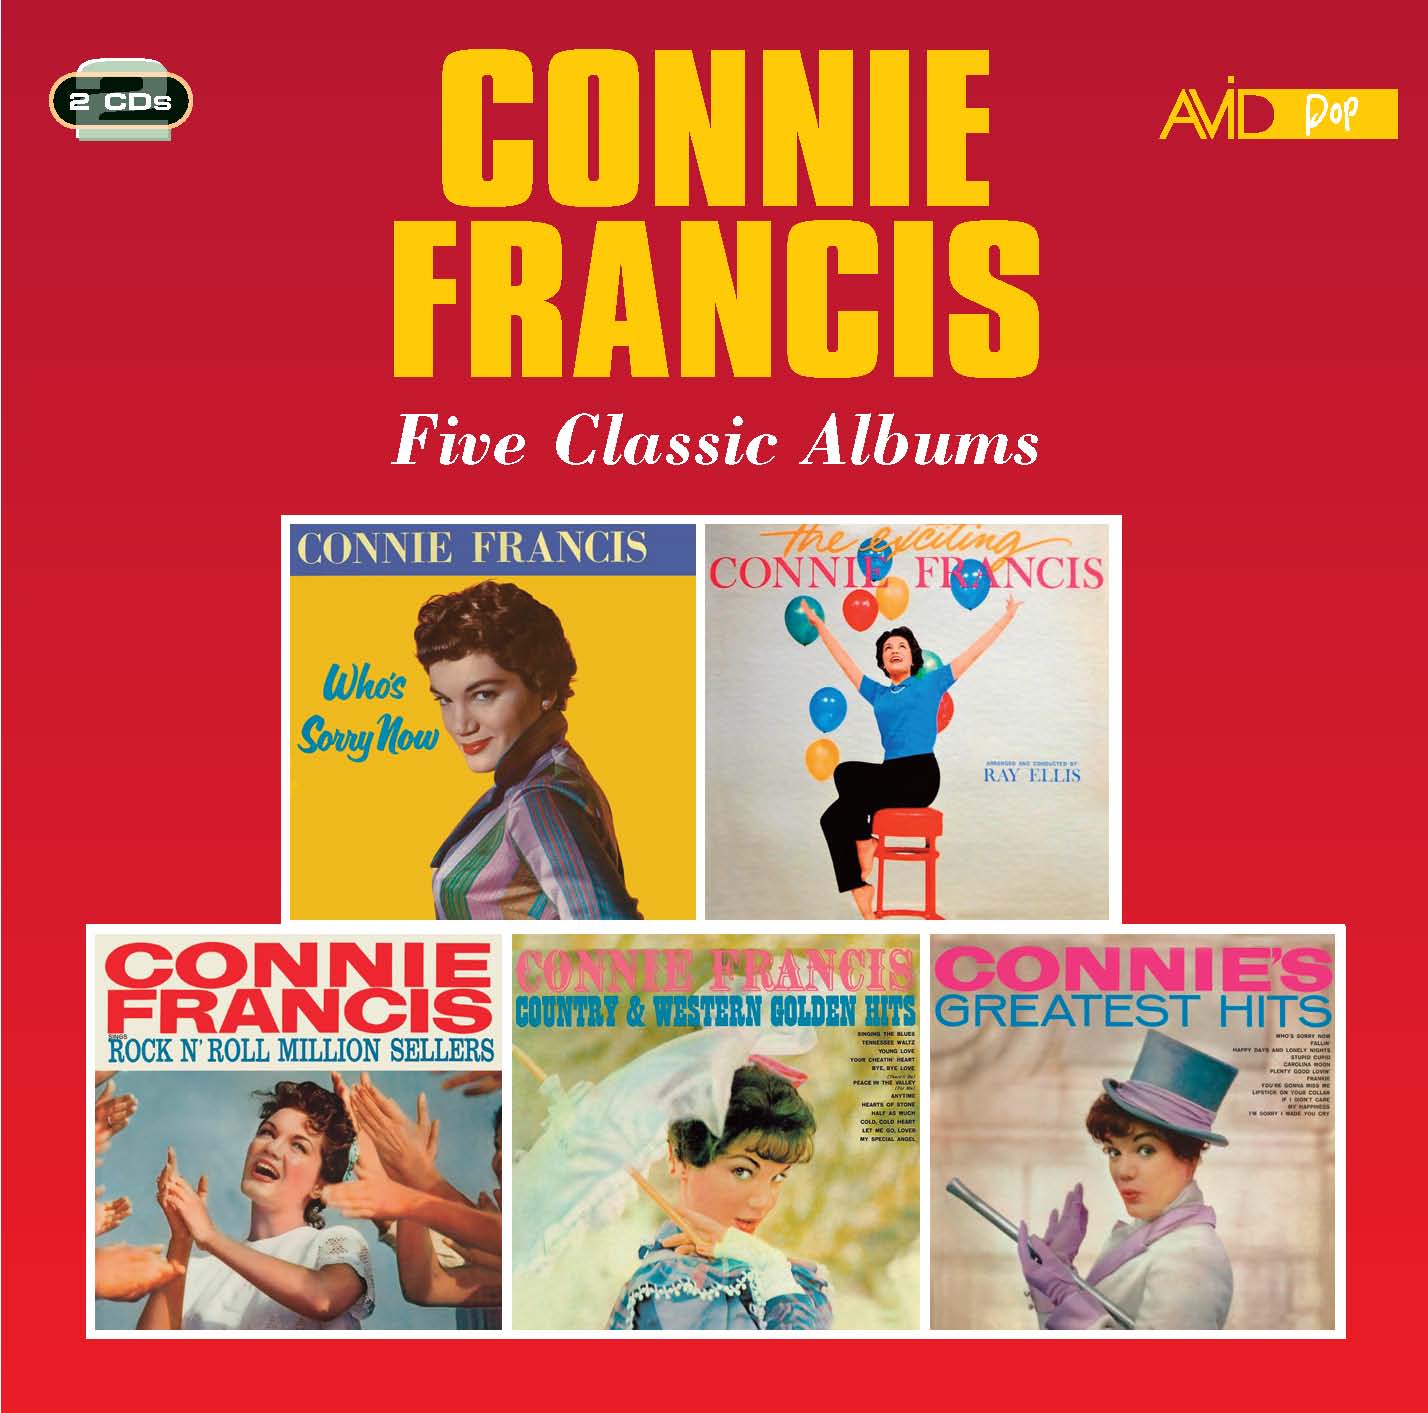 Hits　The　(Who's　Hits)　Classic　N　(2CD)　Connie's　Roll　Golden　Connie　Albums　Country　Western　Greatest　Million　Rock　Sorry　Exciting　Now　Sellers　Francis:　Five